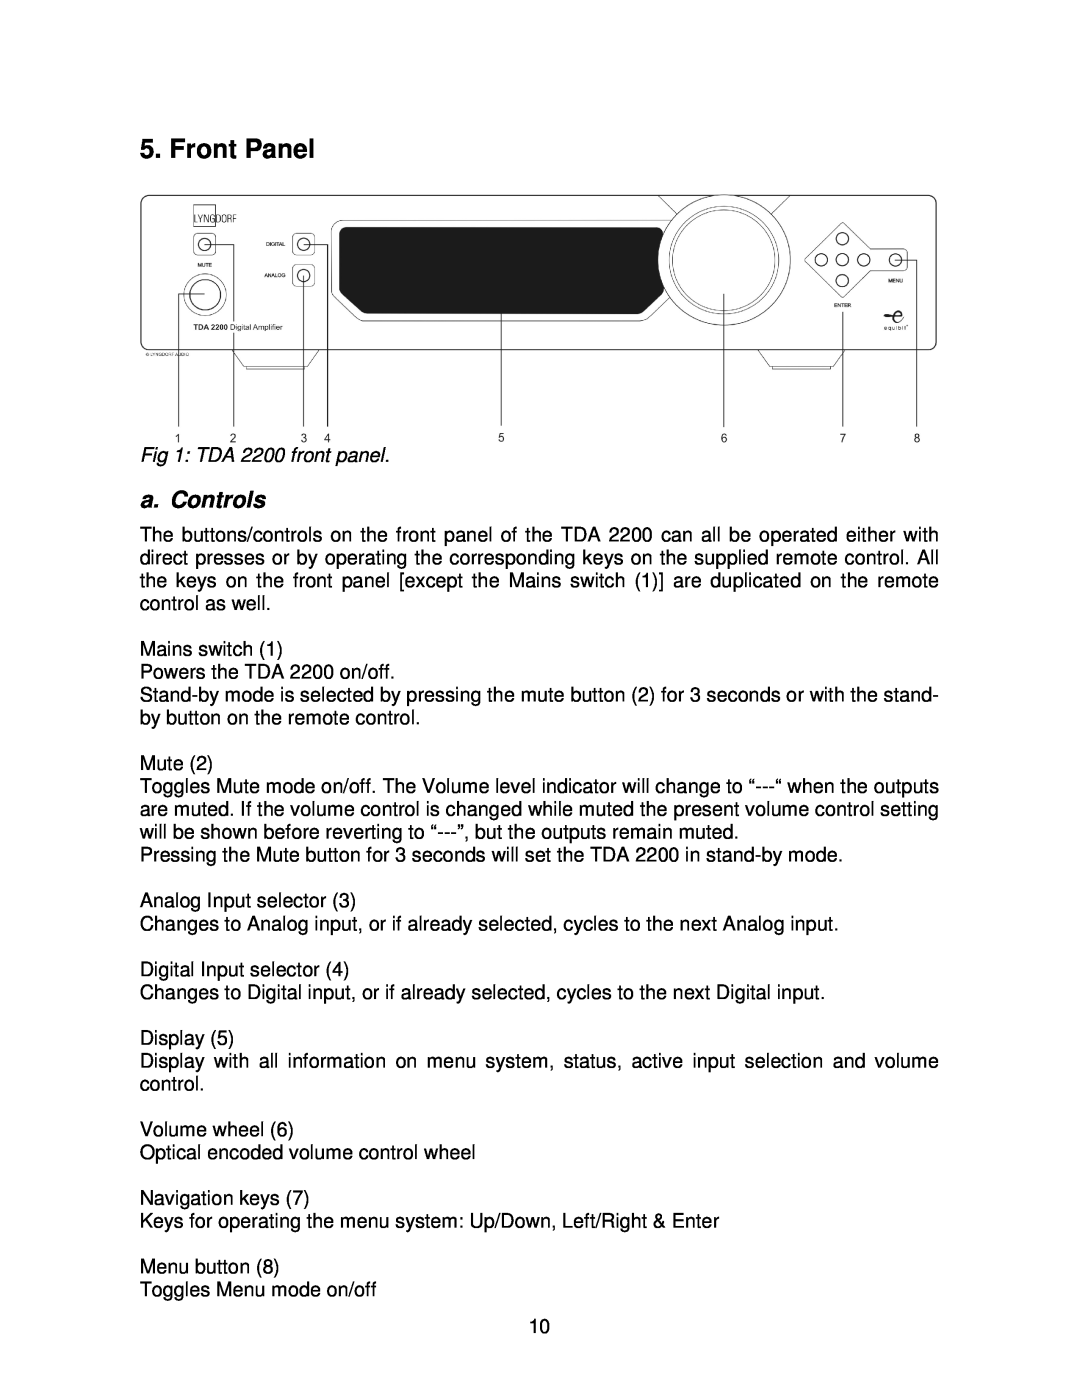 Lyngdorf Audio owner manual Front Panel, a. Controls, TDA 2200 front panel 